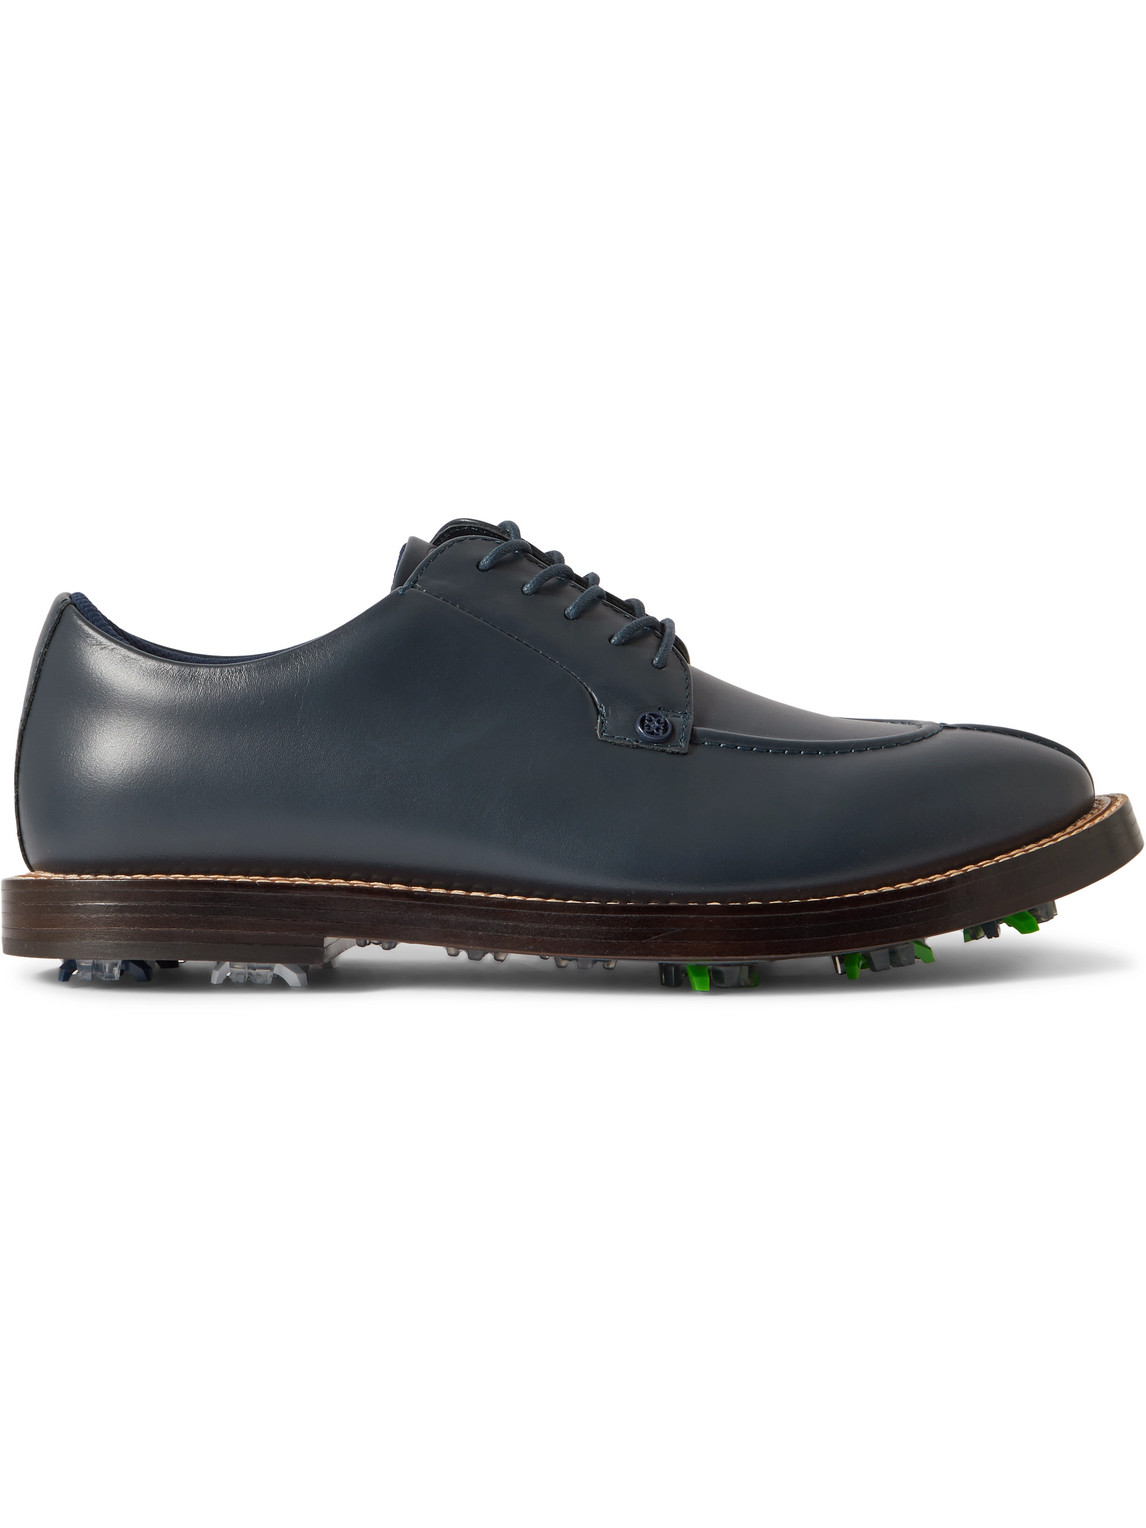 G/FORE Golf Leather Shoes